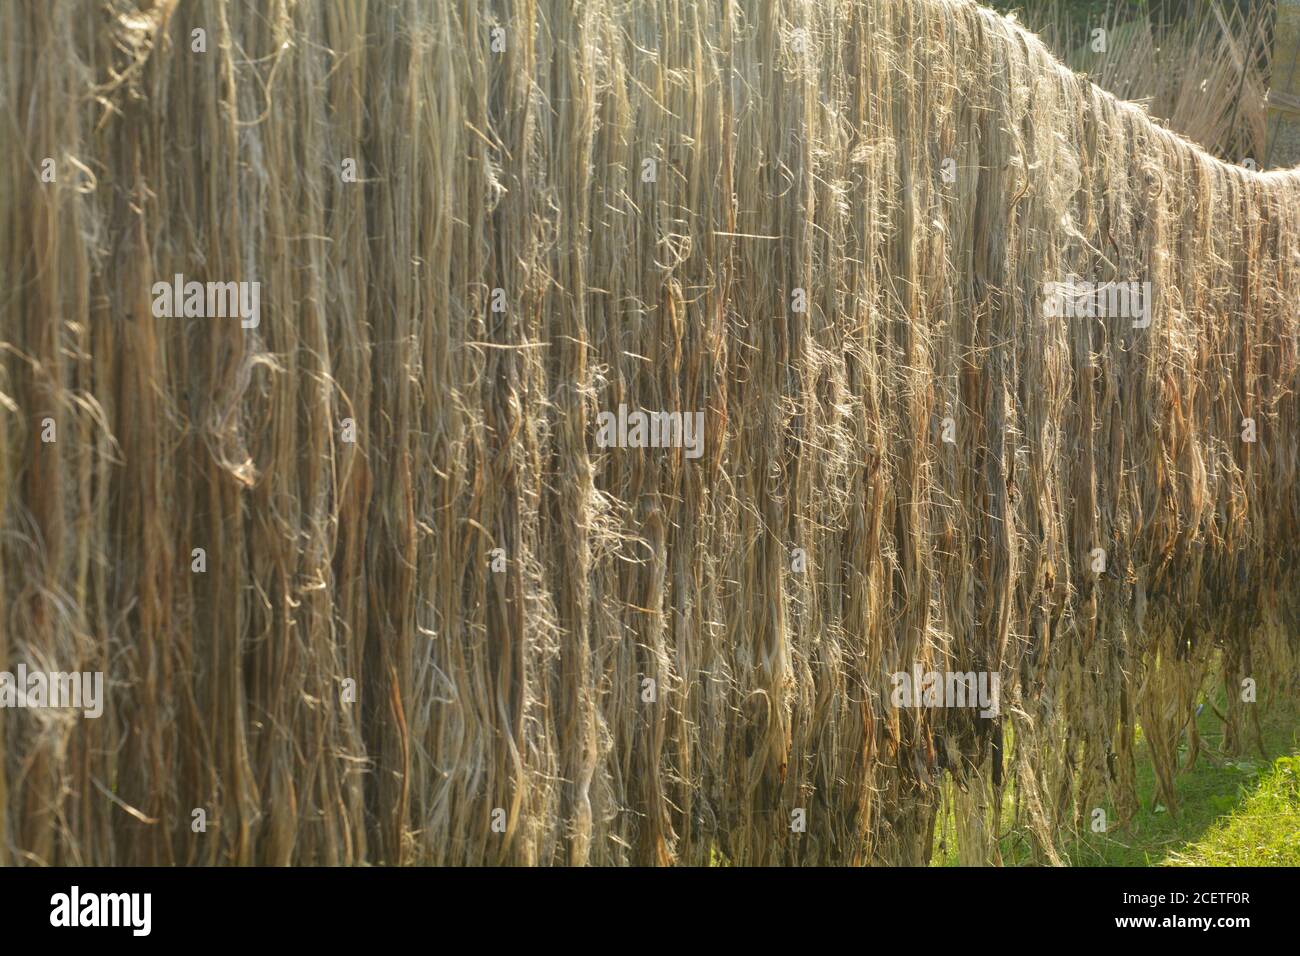 Jute fibers, fabric hanging on long bamboo poles in day light for drying on a village road side, selective focusing Stock Photo